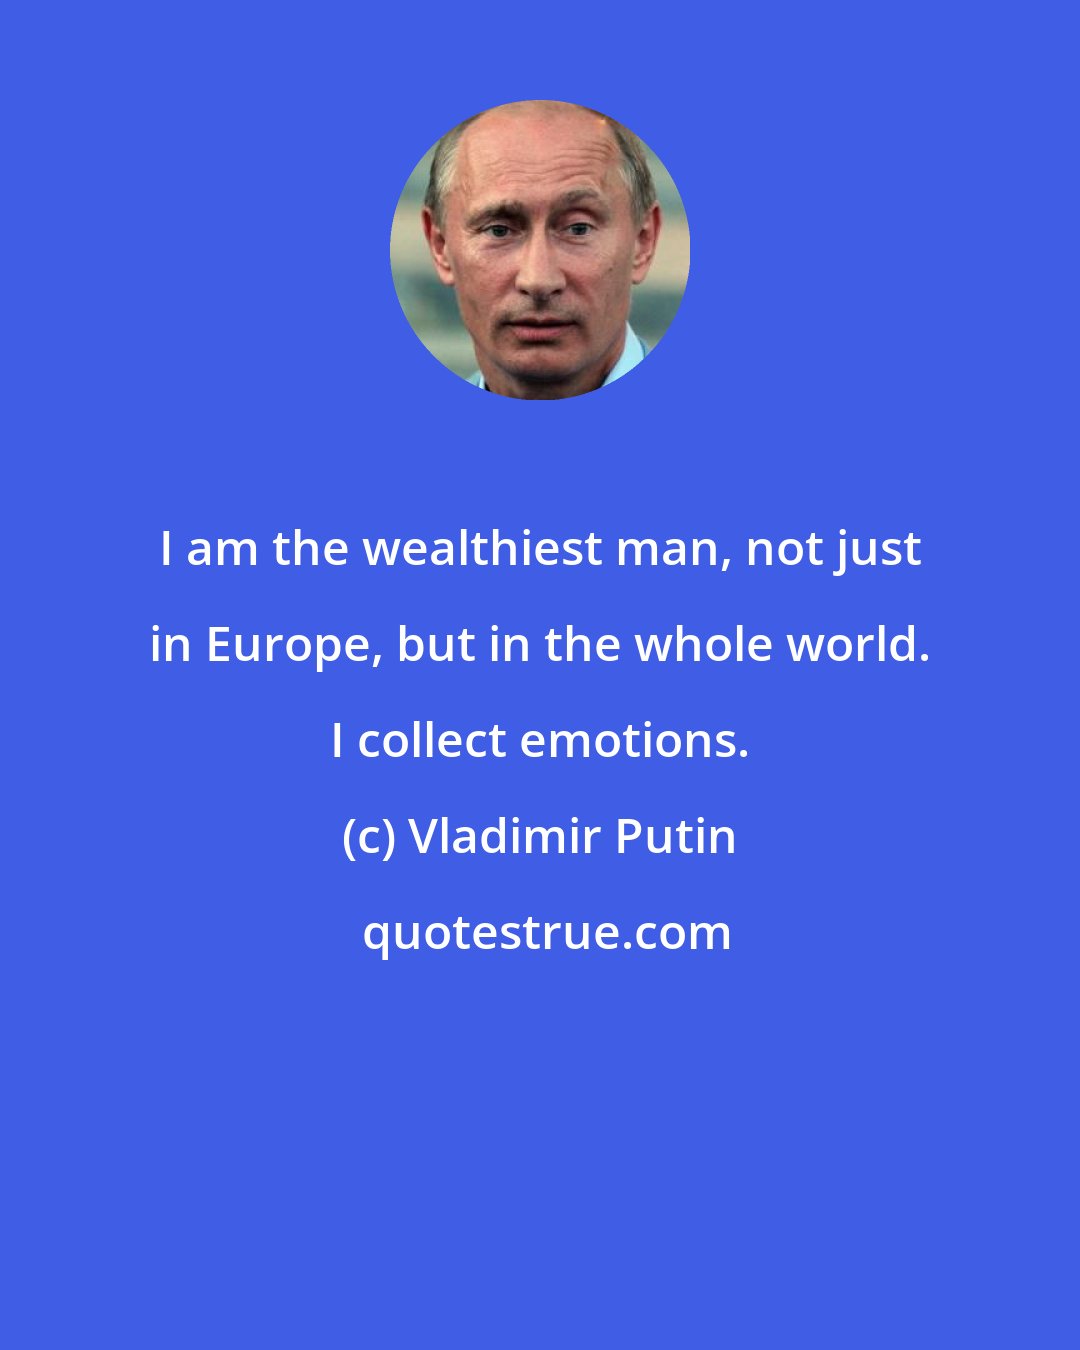 Vladimir Putin: I am the wealthiest man, not just in Europe, but in the whole world. I collect emotions.